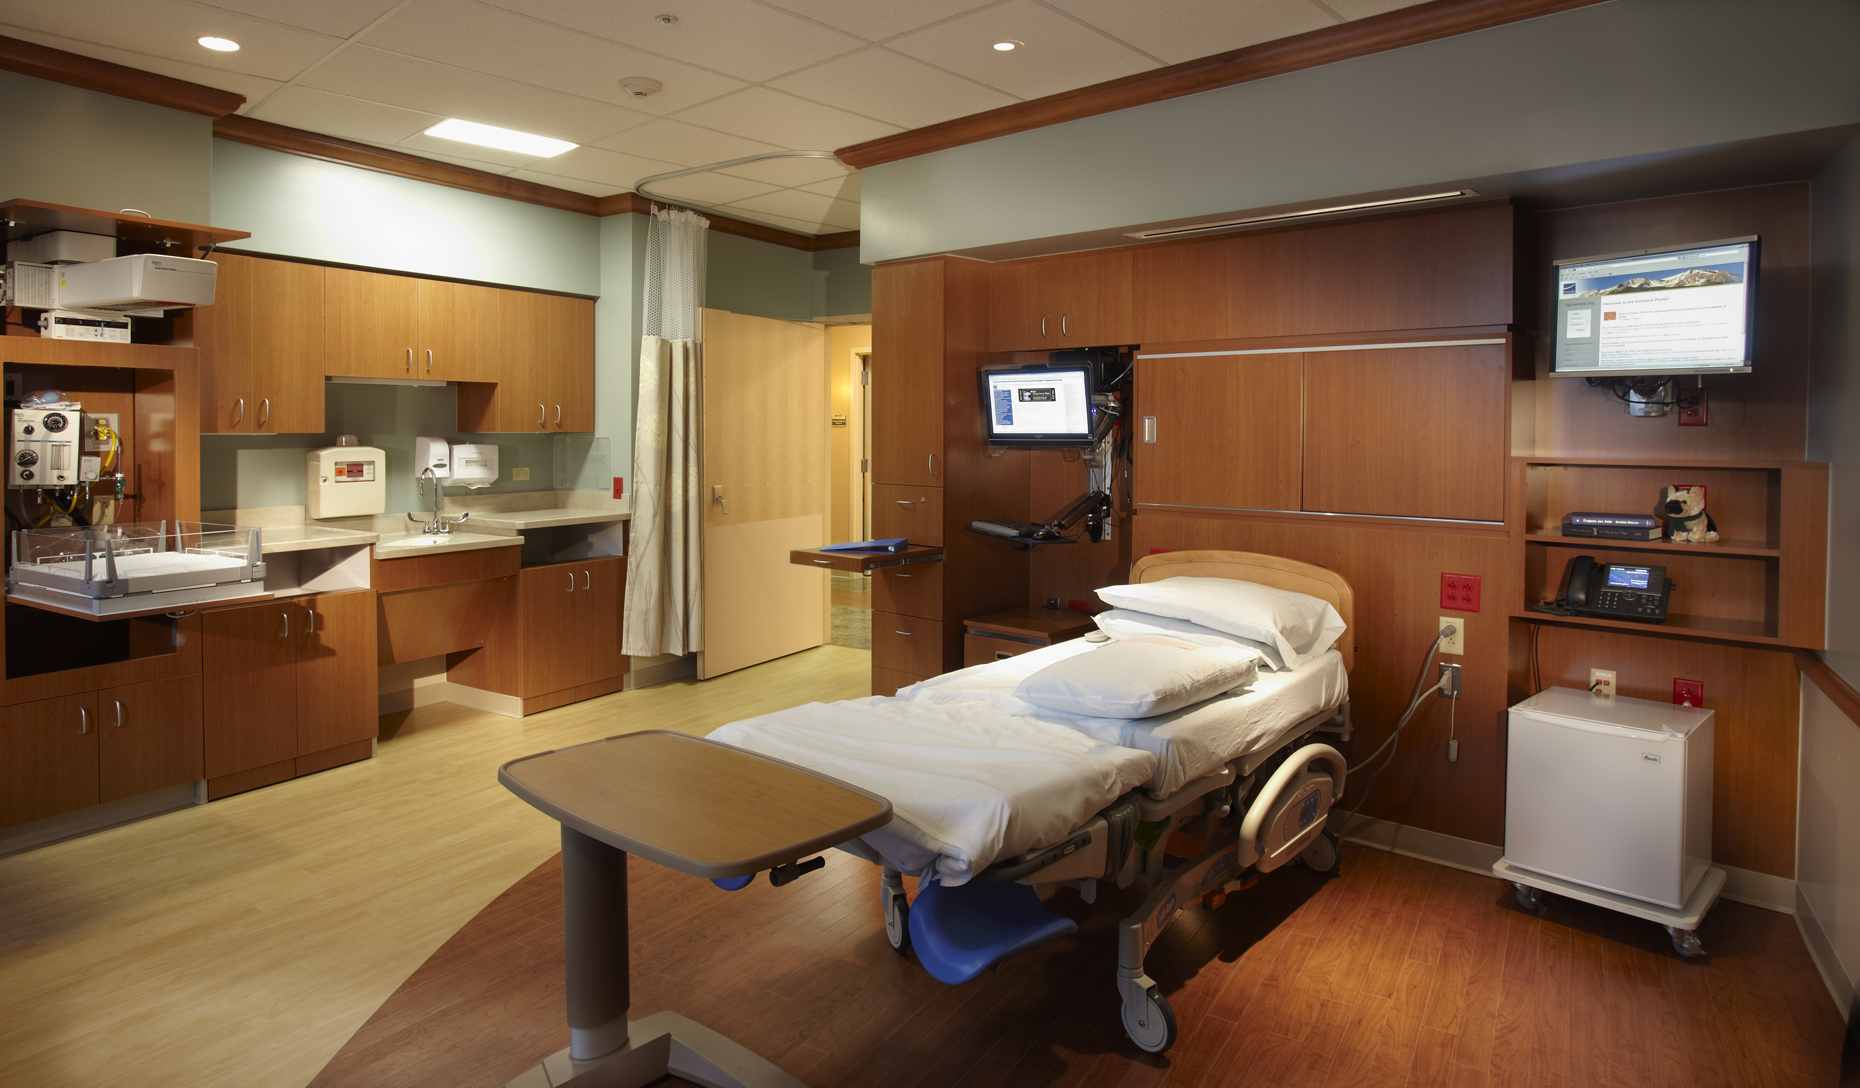 David Patterson Photography/Photography of Architecture+ Interiors, Health Care Facilities,  Denver, Colorado